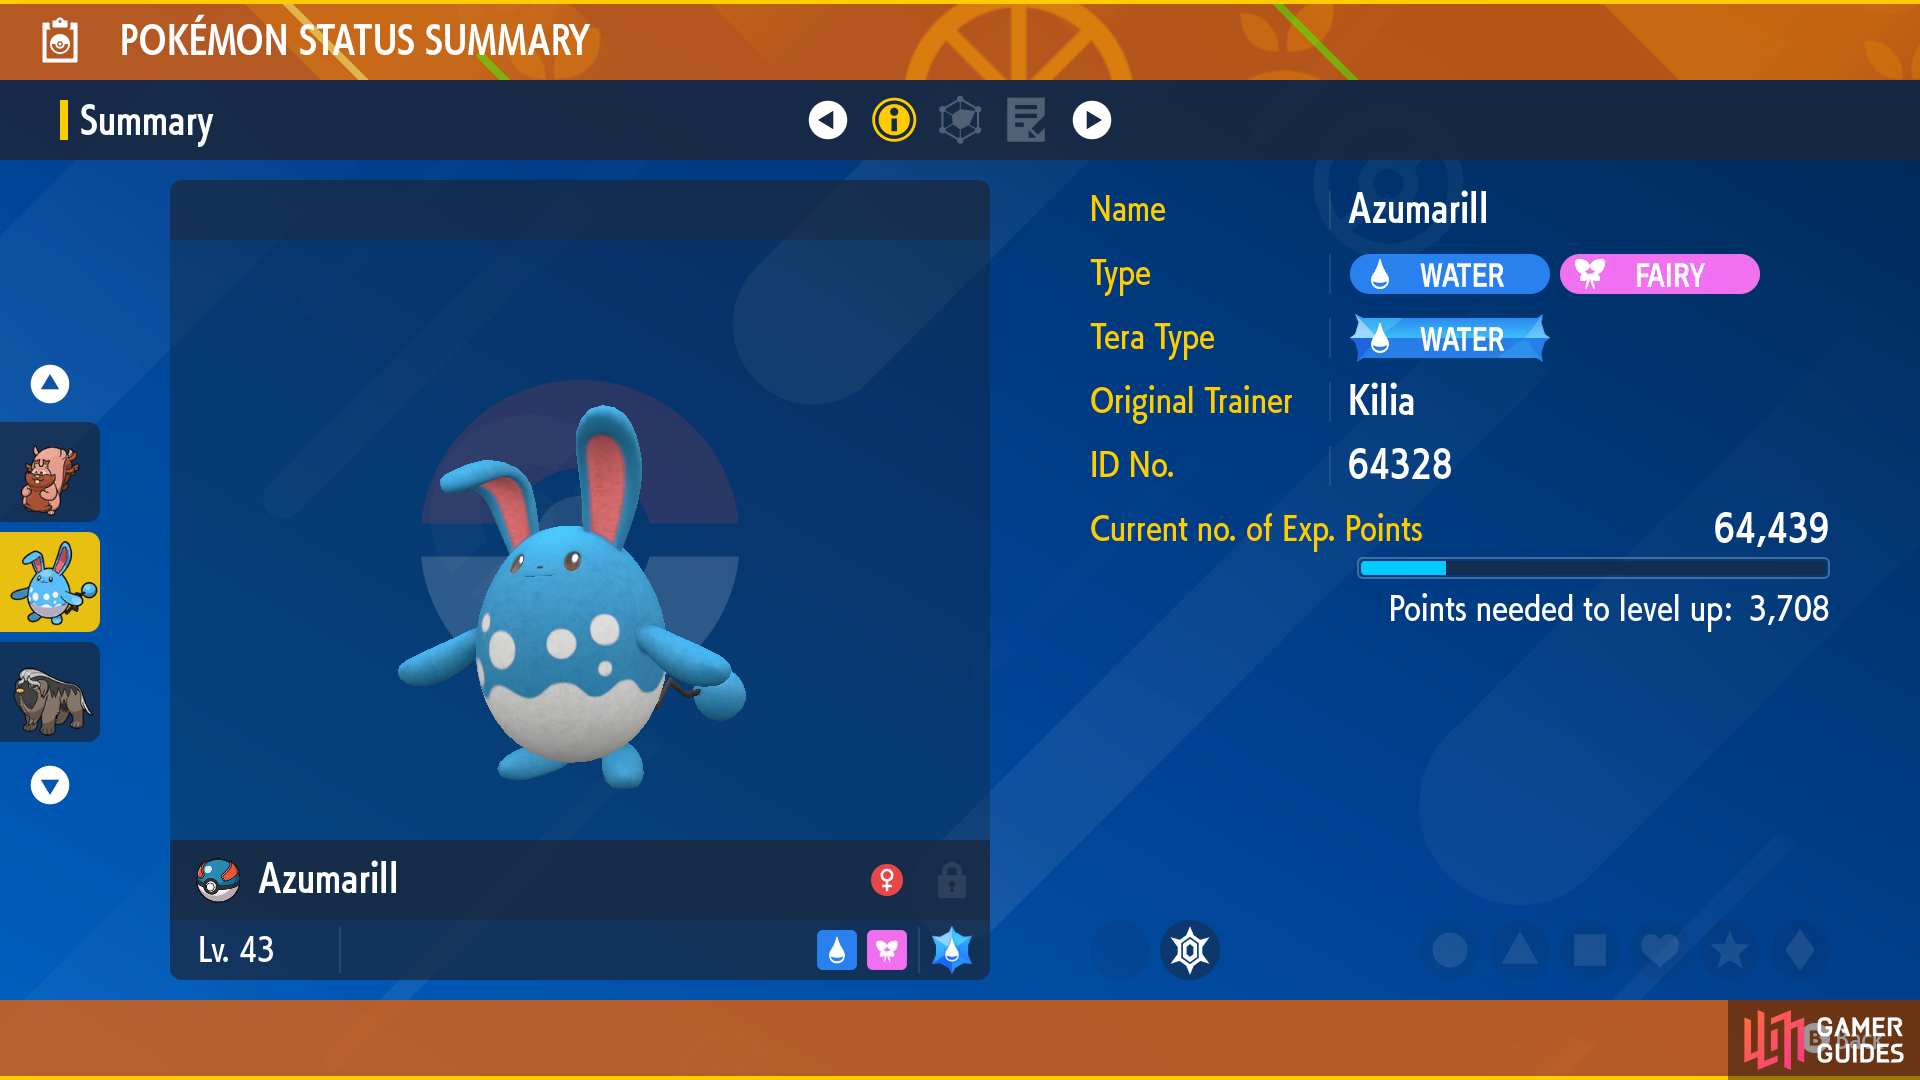 Azumarill is a Water and Fairy Type Pokemon.